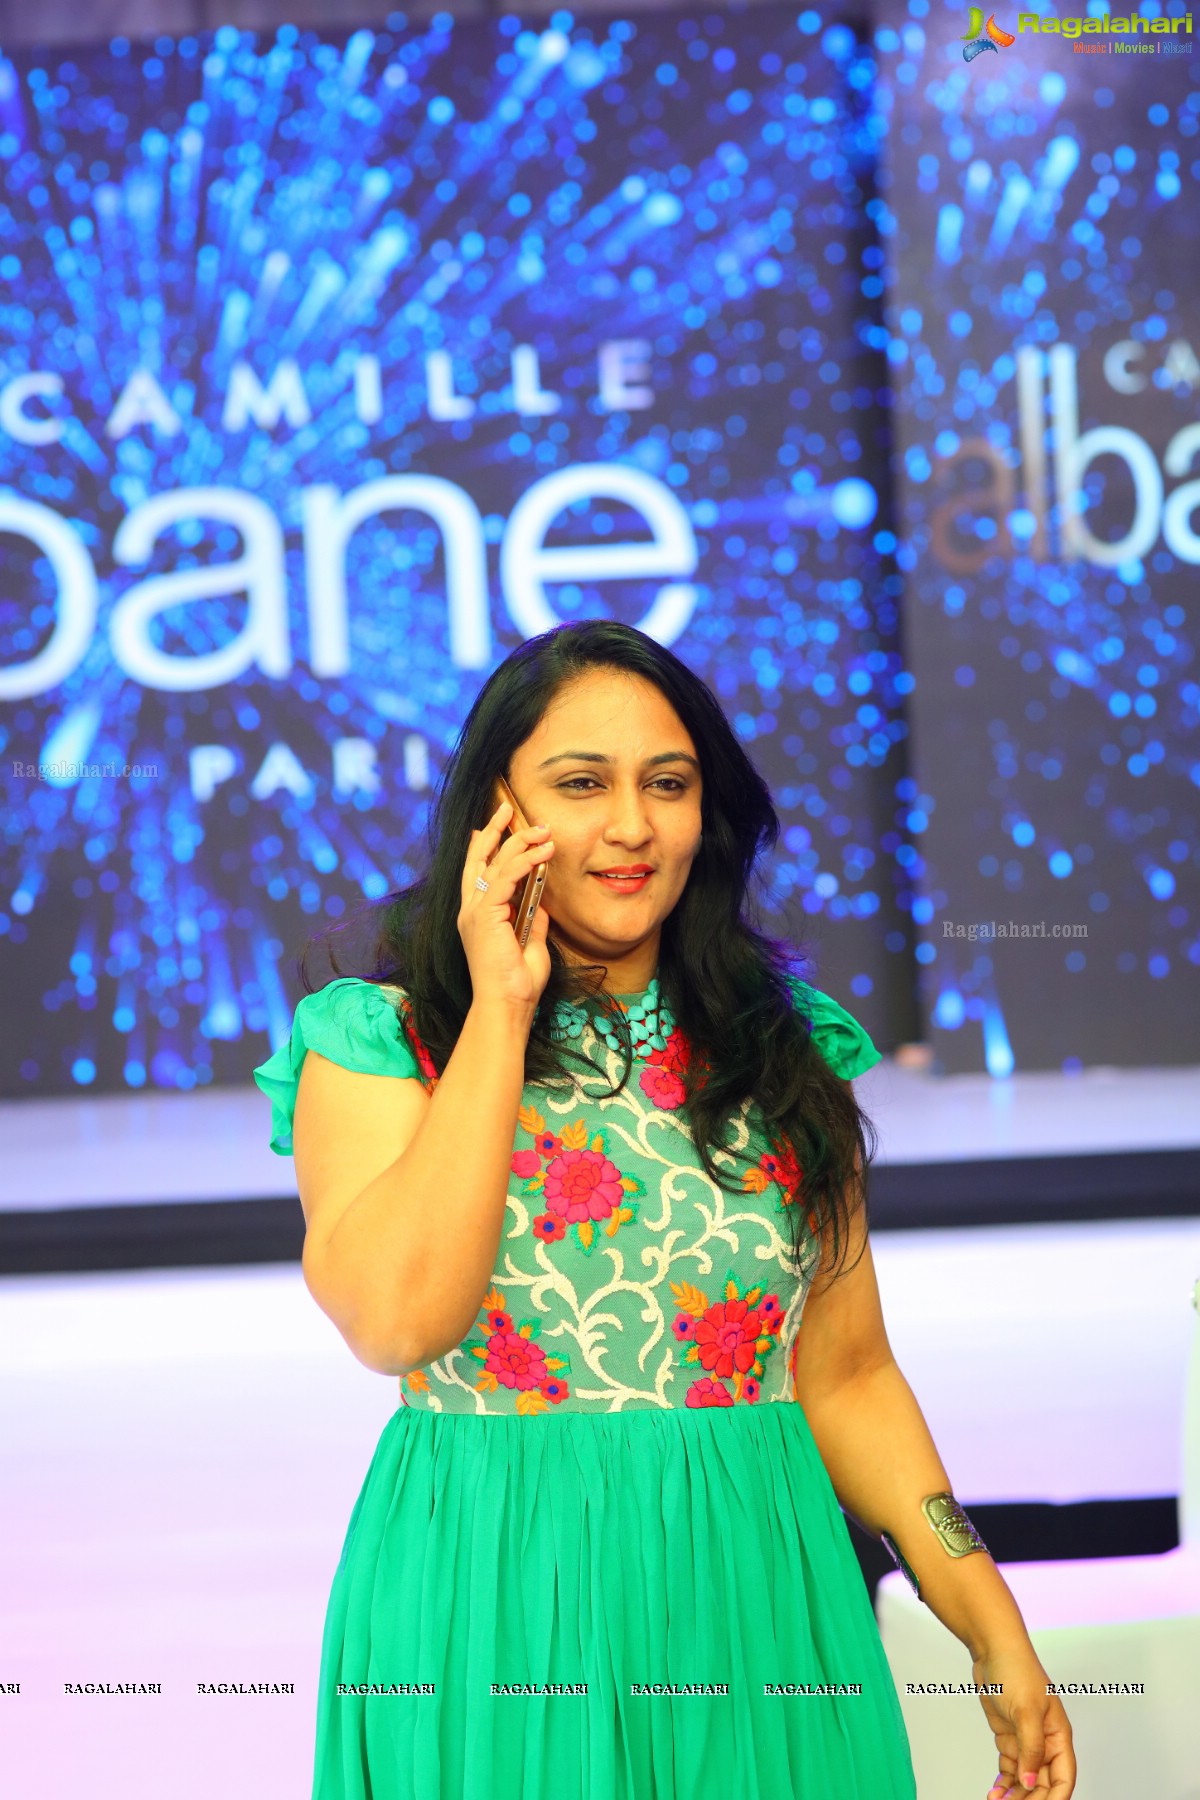 Camille Albane French Magic in India